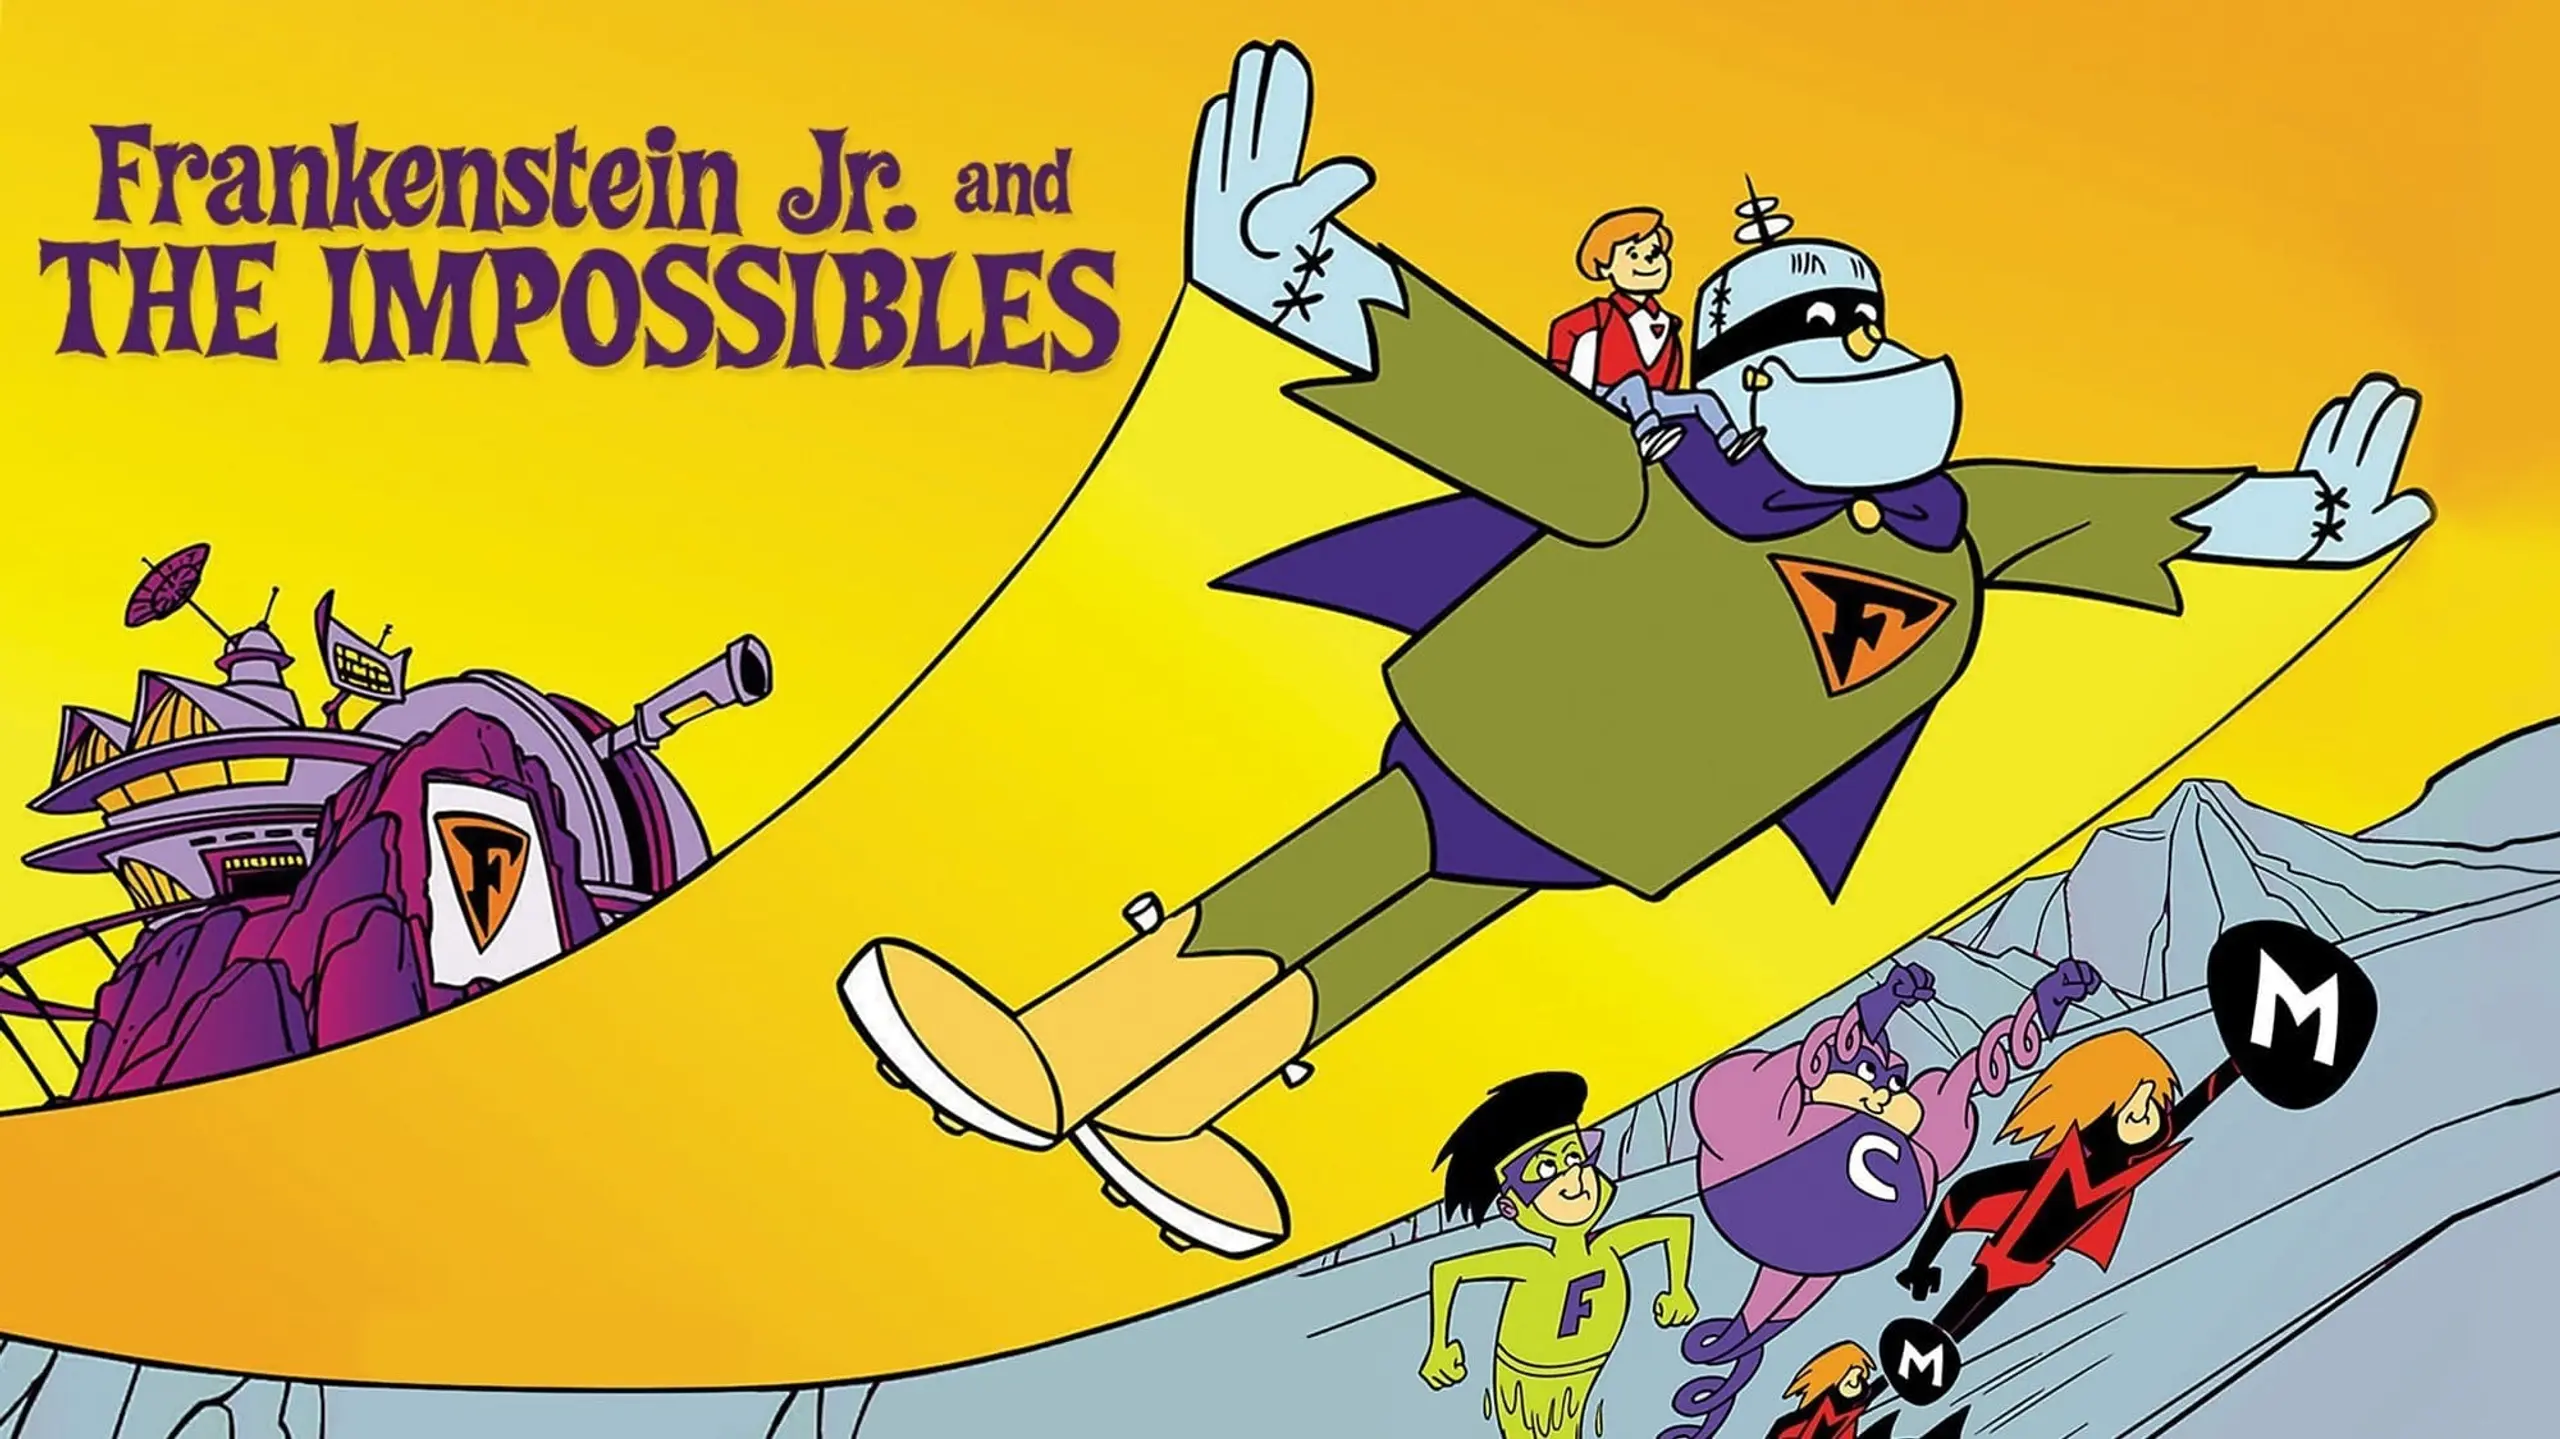 Frankenstein, Jr. and The Impossibles